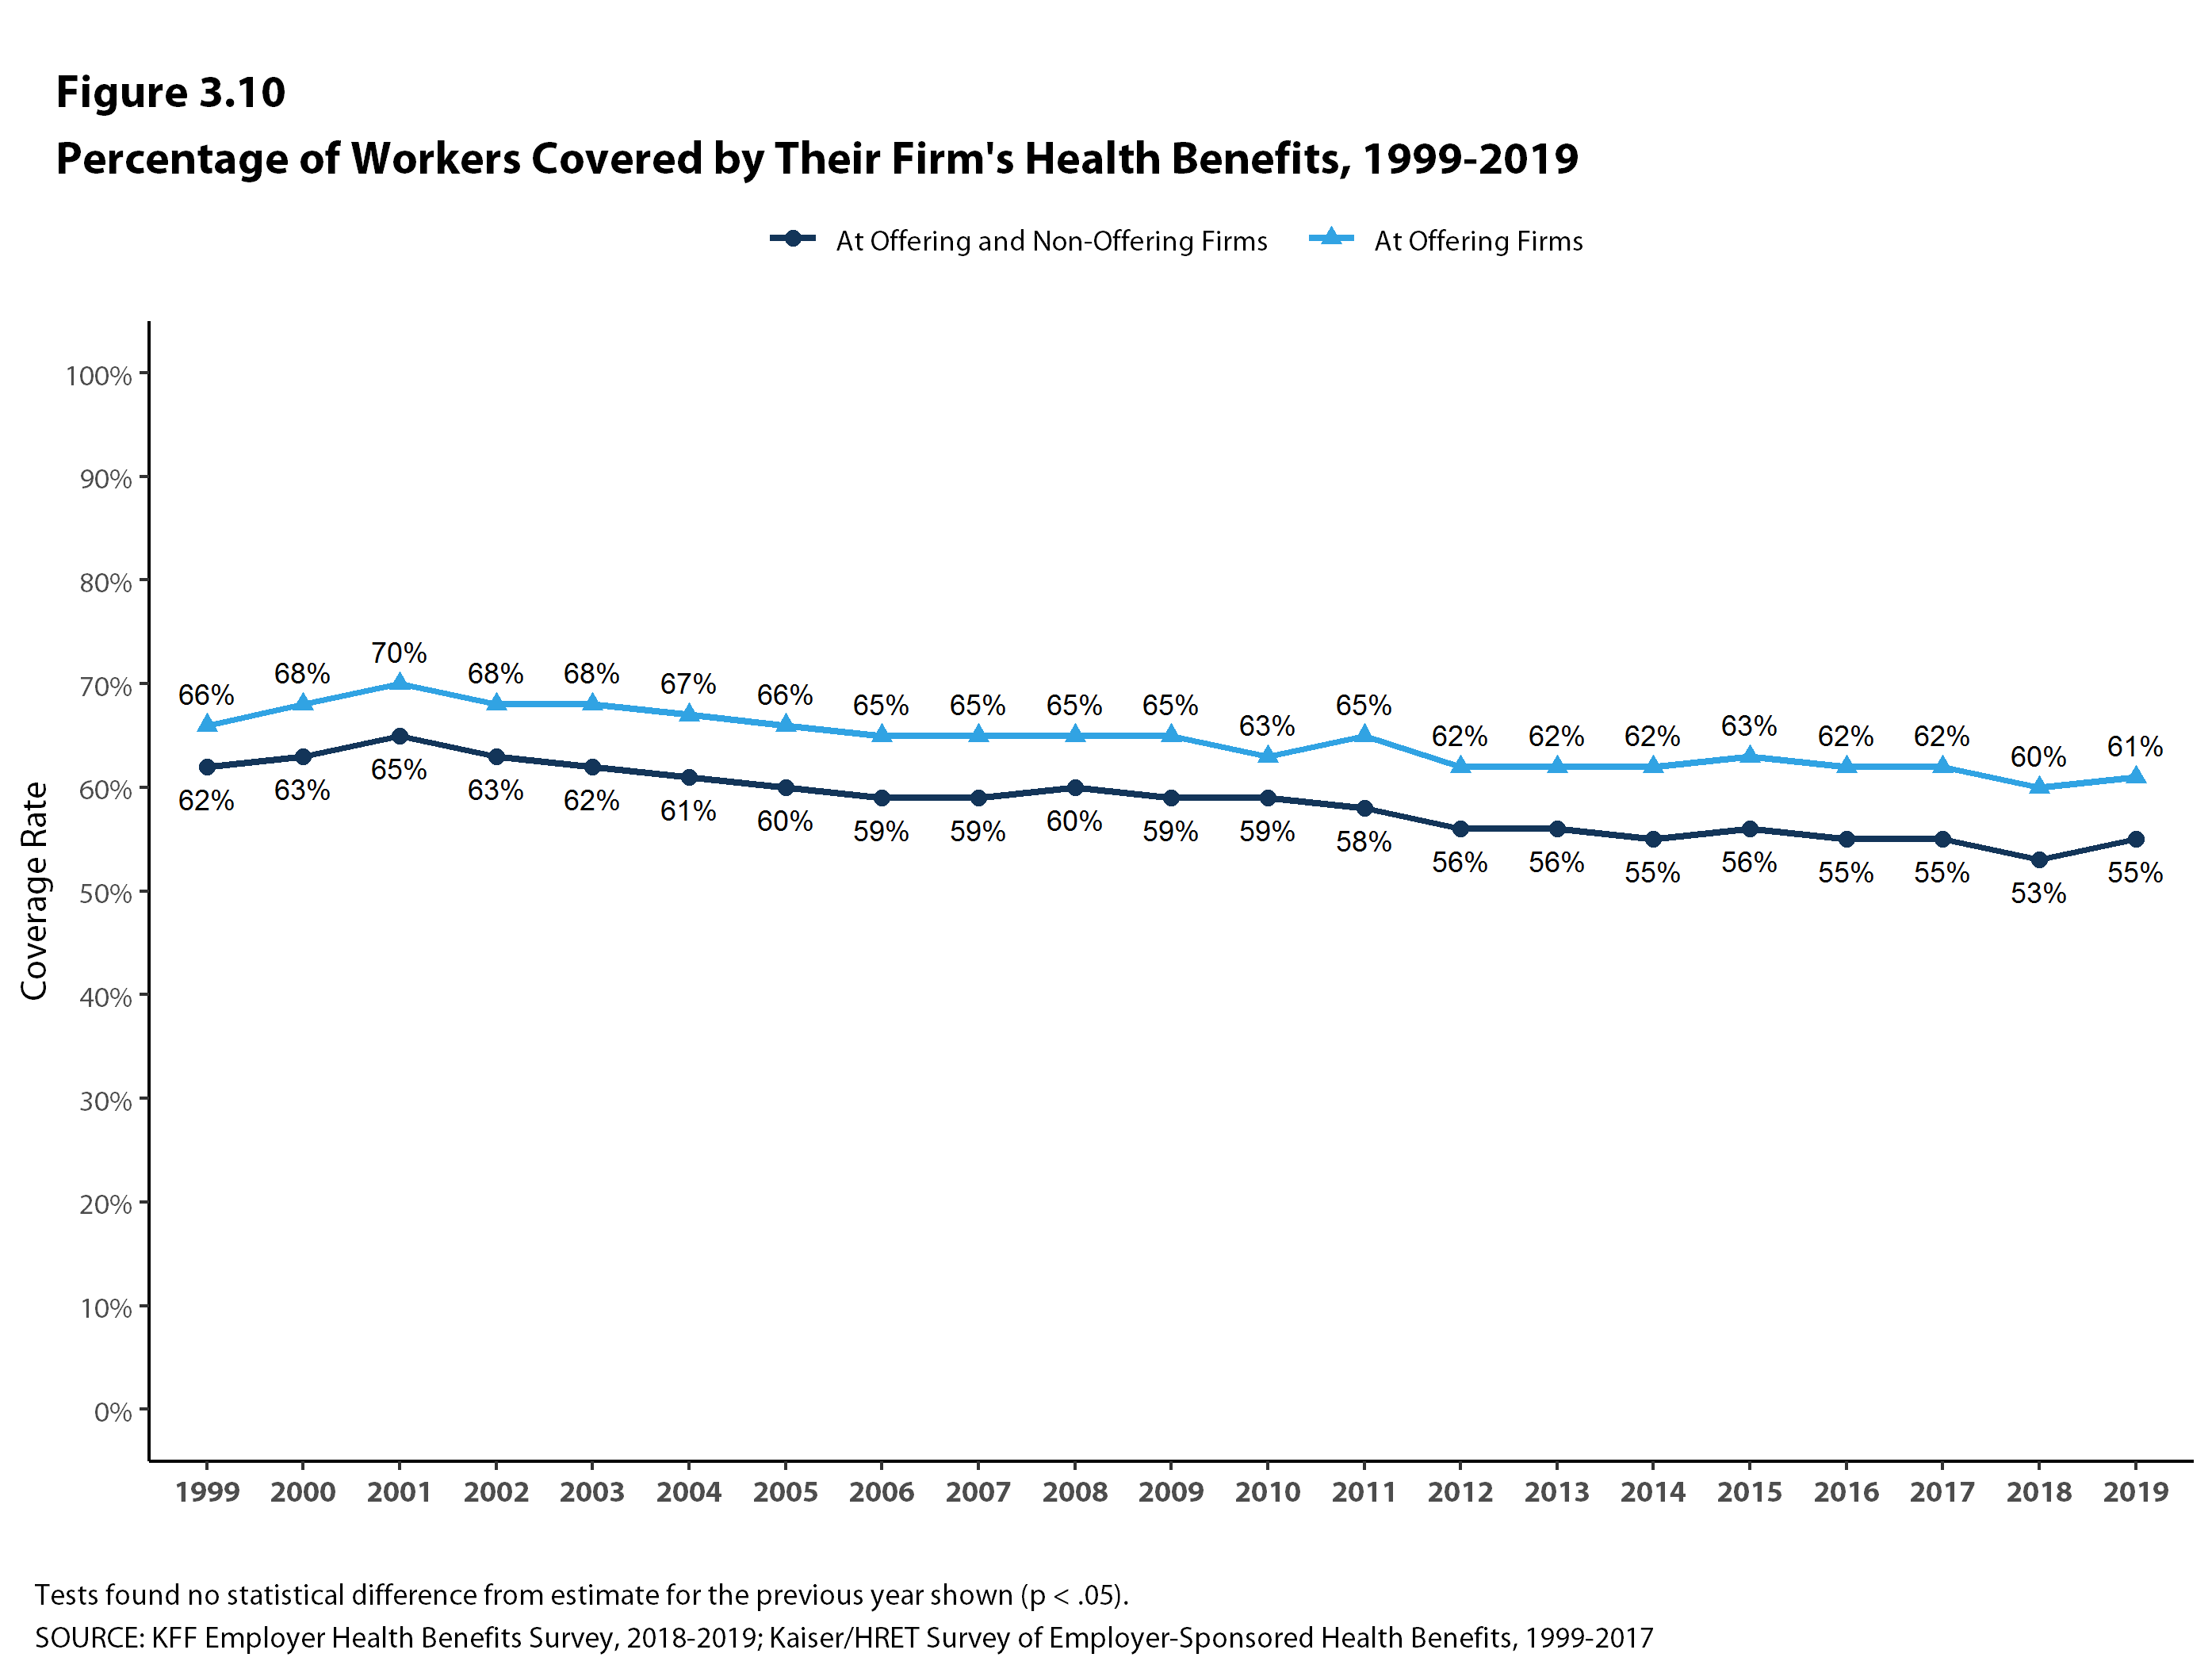 Percentage of Workers Covered by Their Firm’s Health Benefits, 1999